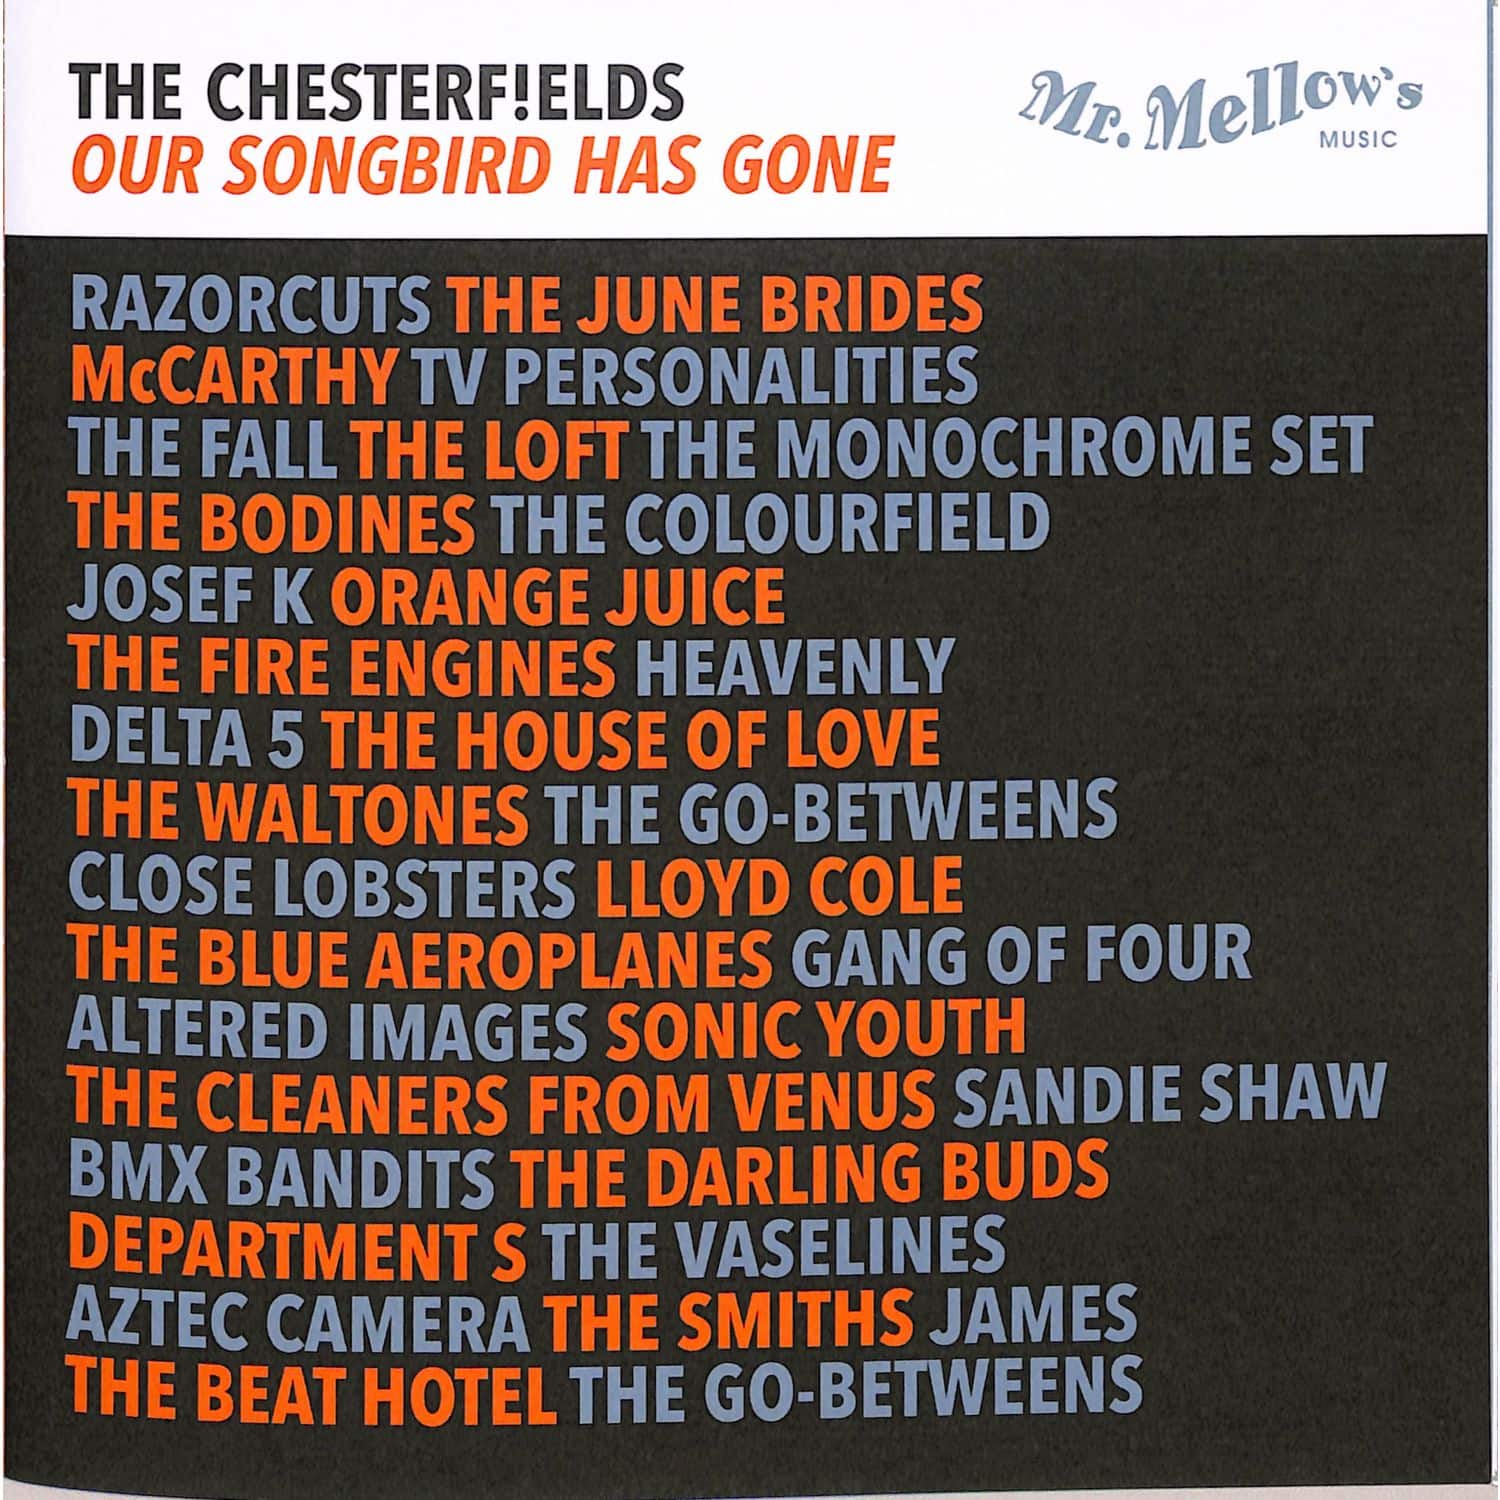 The Chesterfields - OUR SONGBIRD HAS GONE 